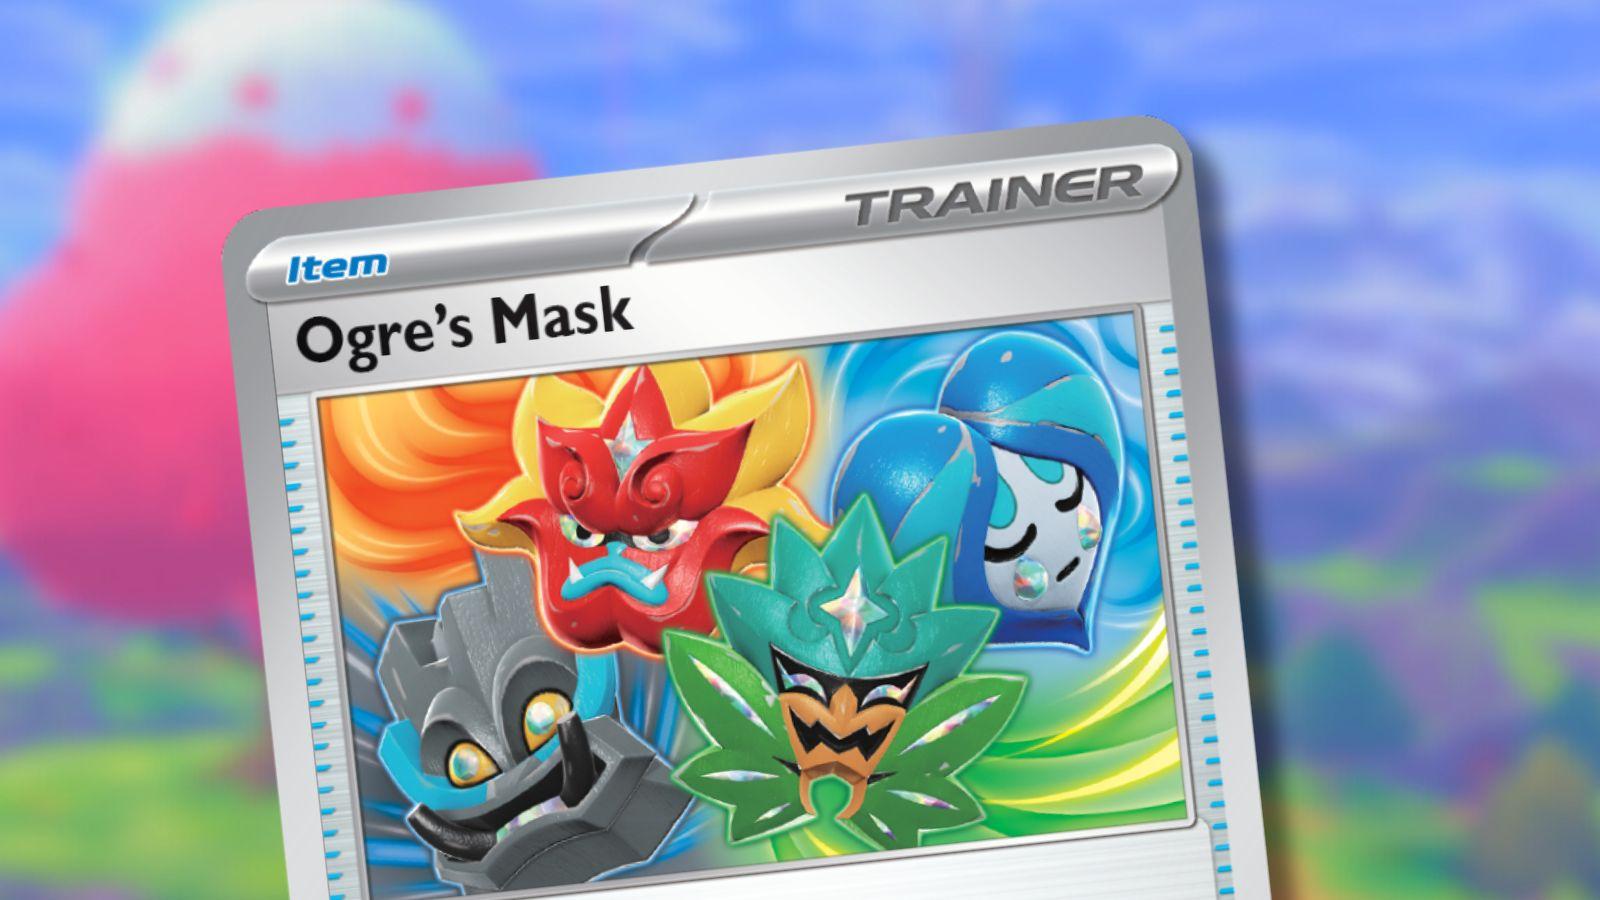 Ogre's Mask Trainer Pokemon card with game background.